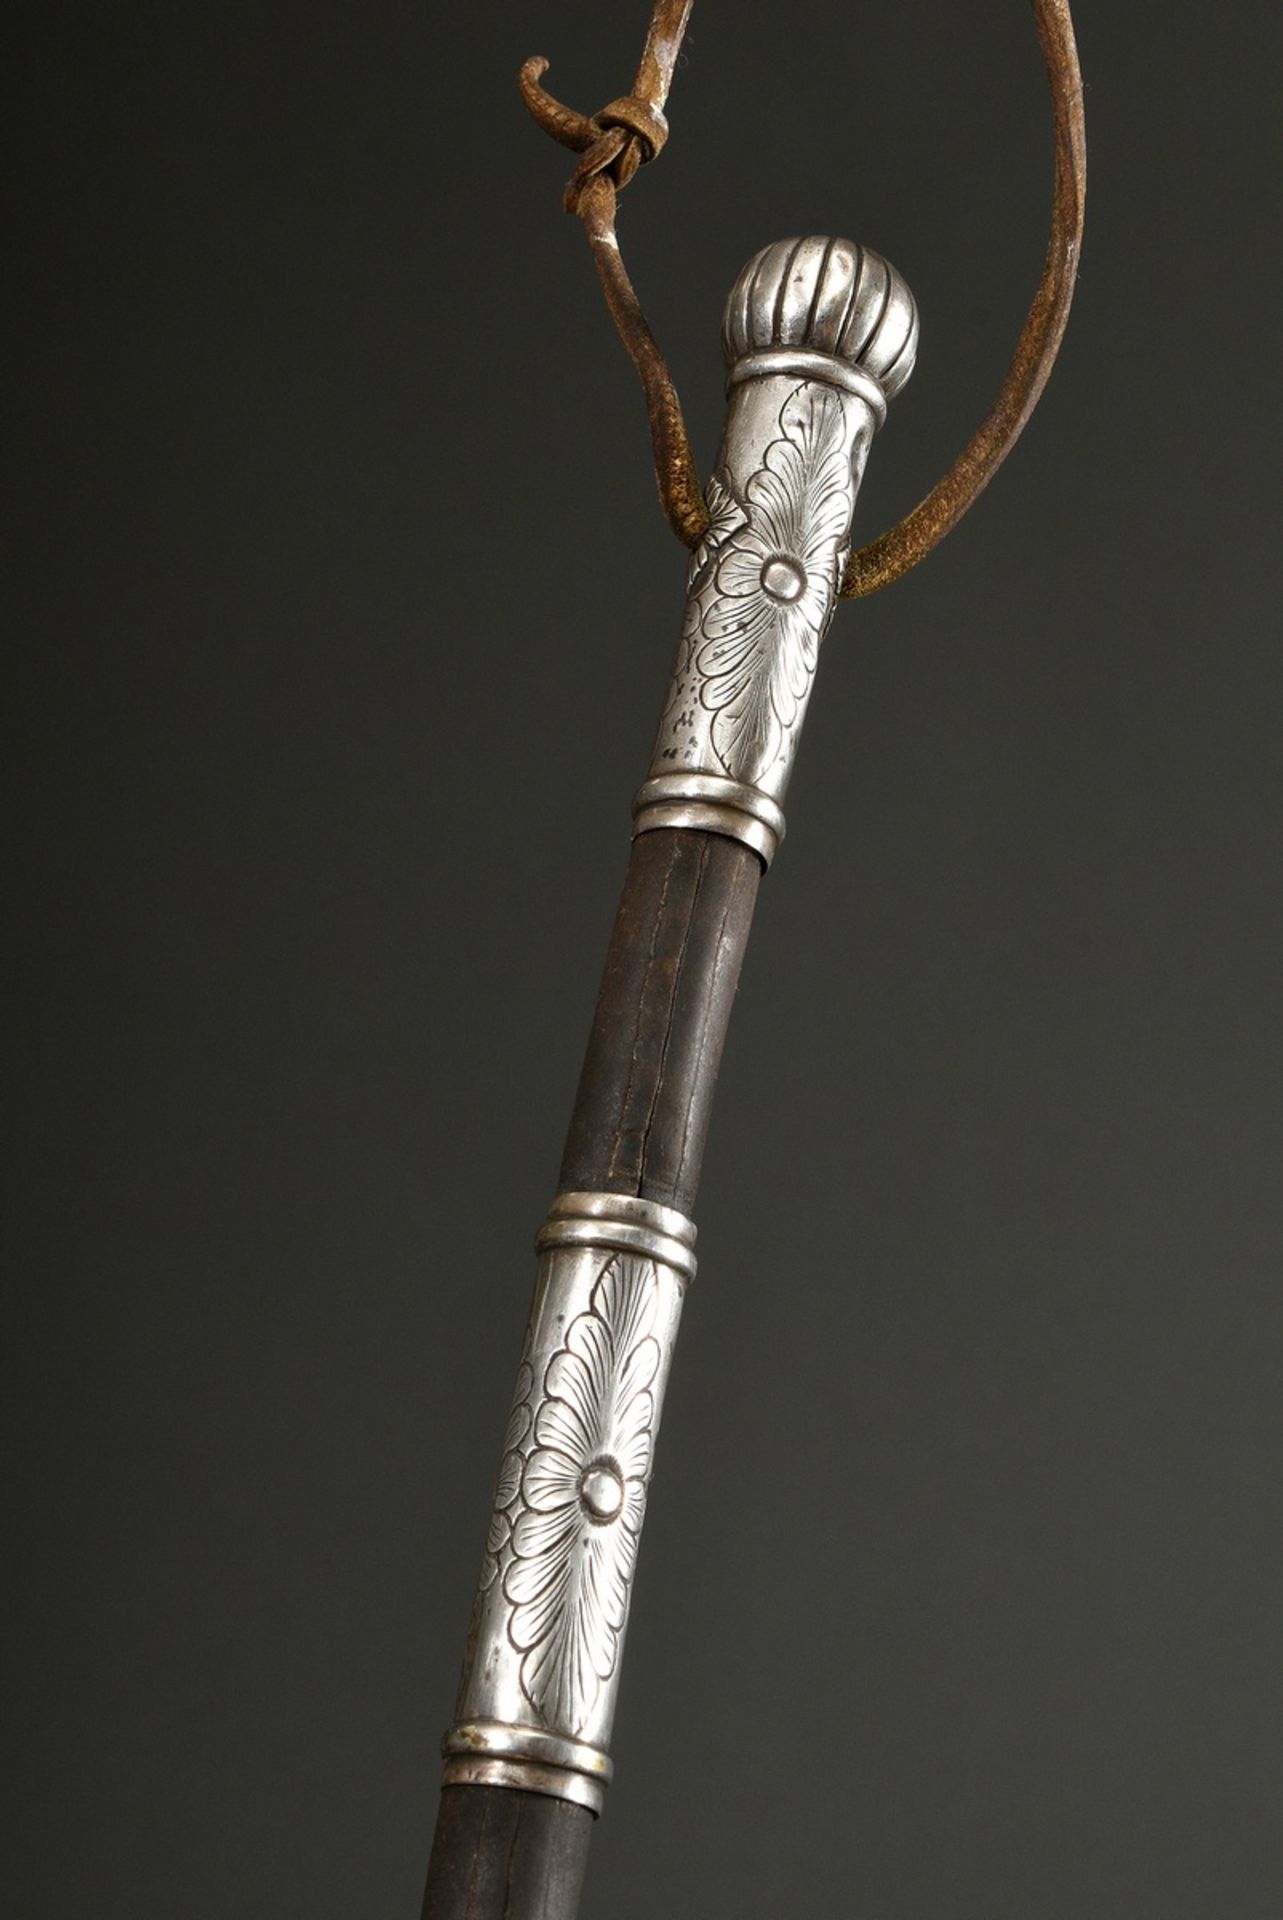 South American gaucho whip so-called Rebenque, leather with florally embossed silver cuffs and hand